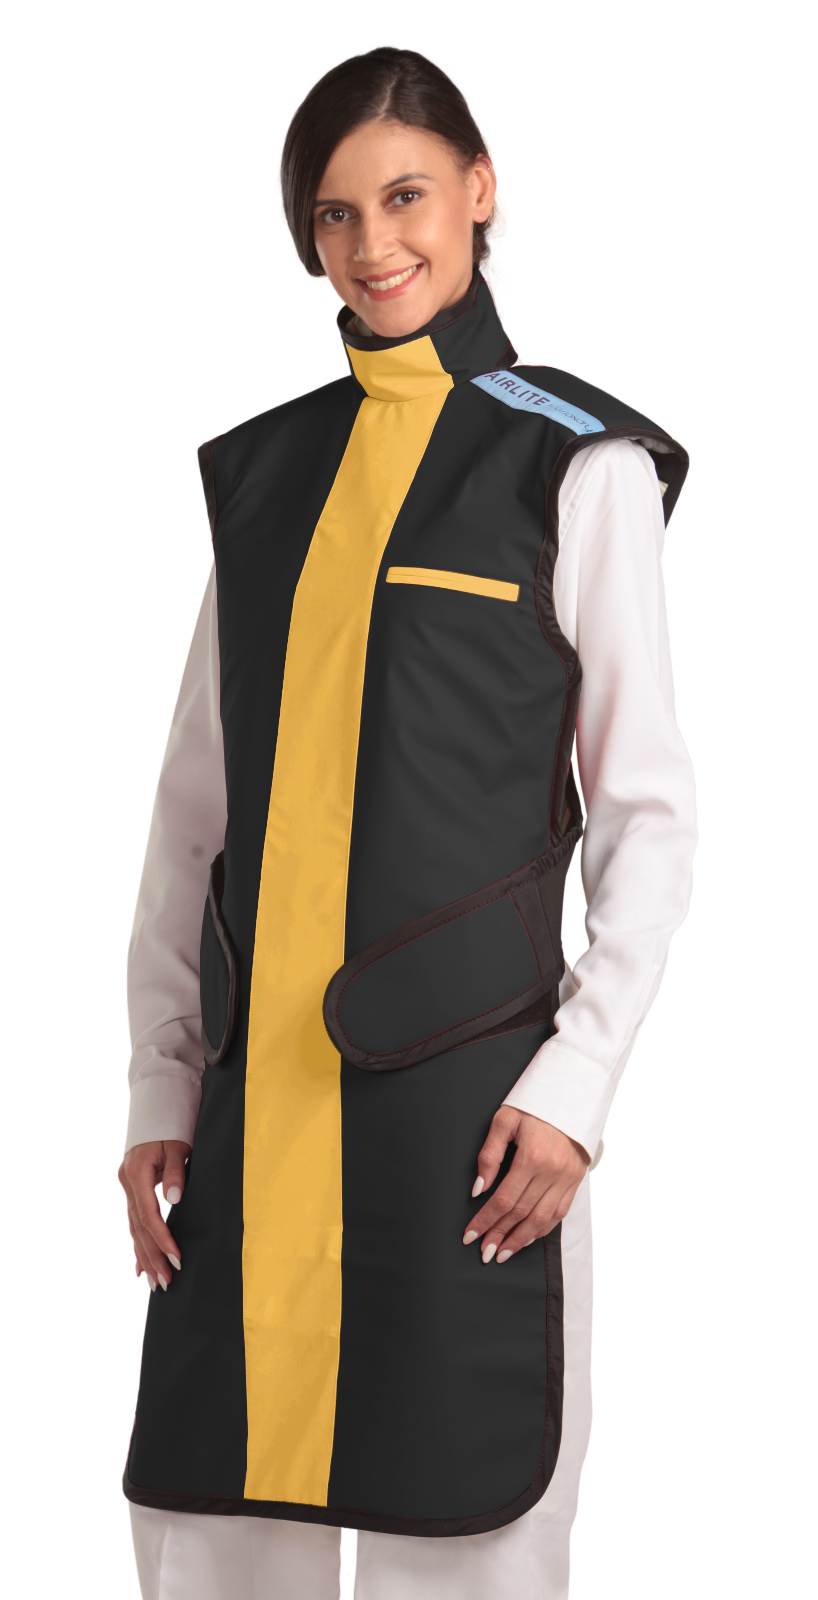 Frontal left-side view of a female model wearing a coat apron with an integrated thyroid guard. The apron is jet black with a yellow-colored center line and has velcro fasteners by the sides.